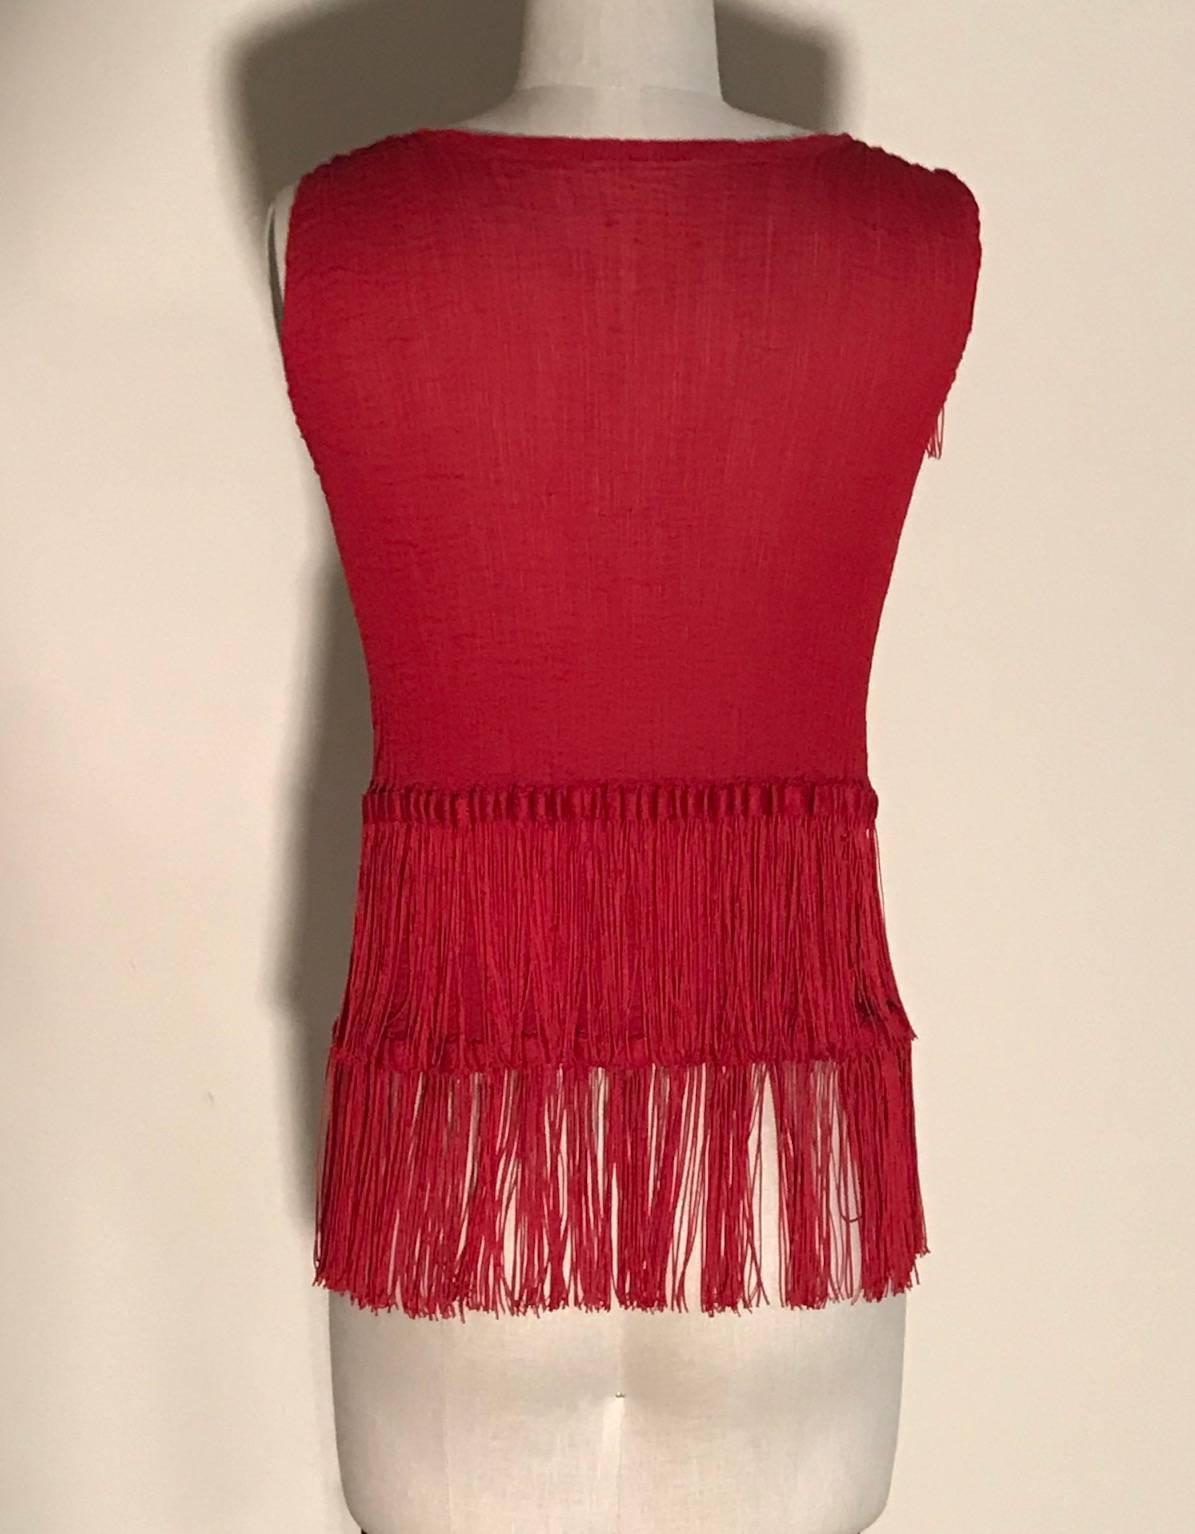 Issey Miyake red fringe tank top from the Me Issey Miyake label. Sleeveless with crinkle pleats throughout and tassel trim at shoulders and hem.

No size, best fits XS/S. See measurements. (Tonss of stretch, measurements taken unstretched. Pictured